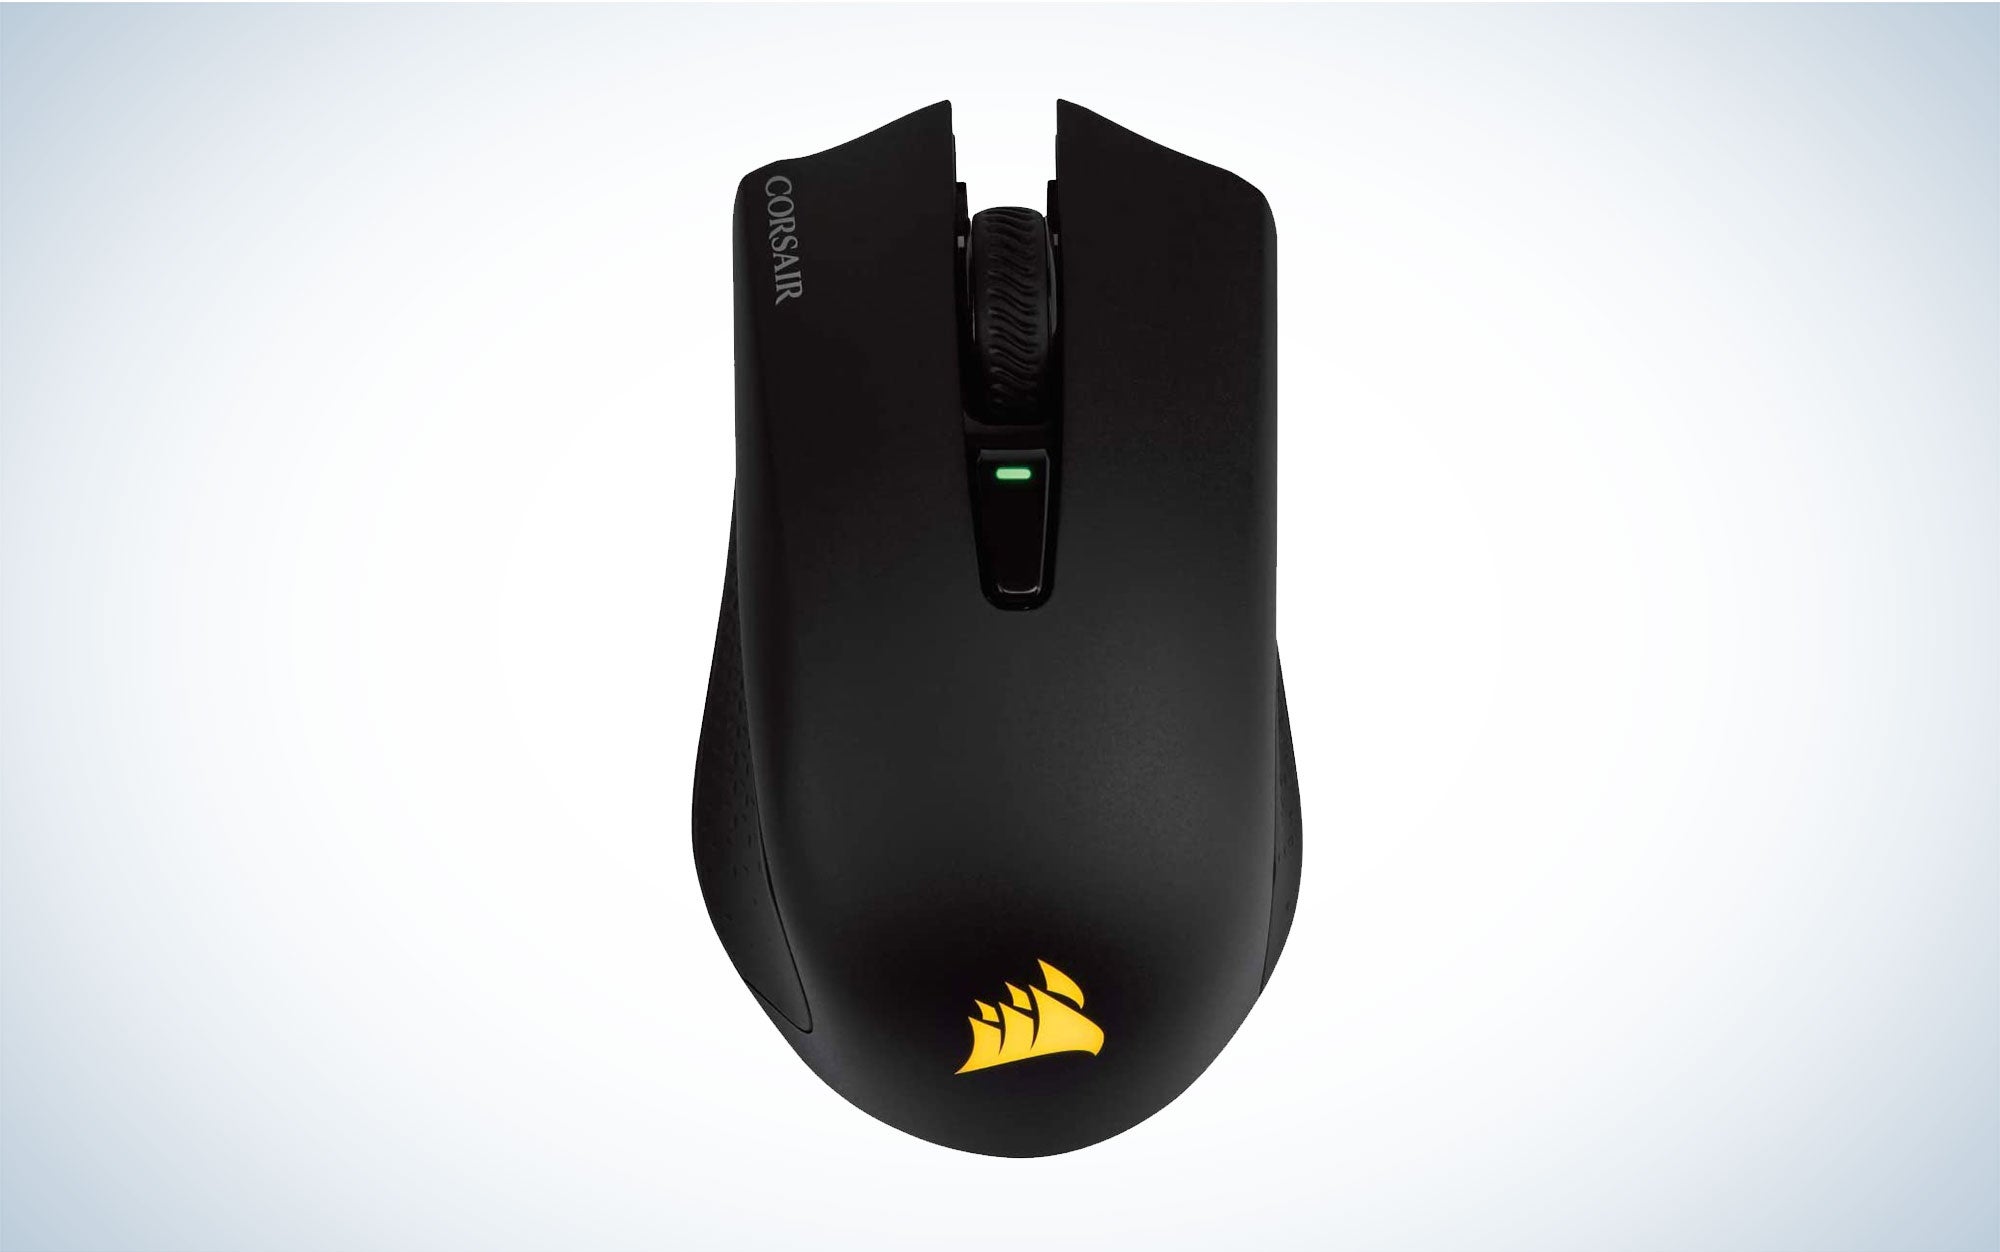 Corsair Harpoon RGB is the best cheap gaming mouse.